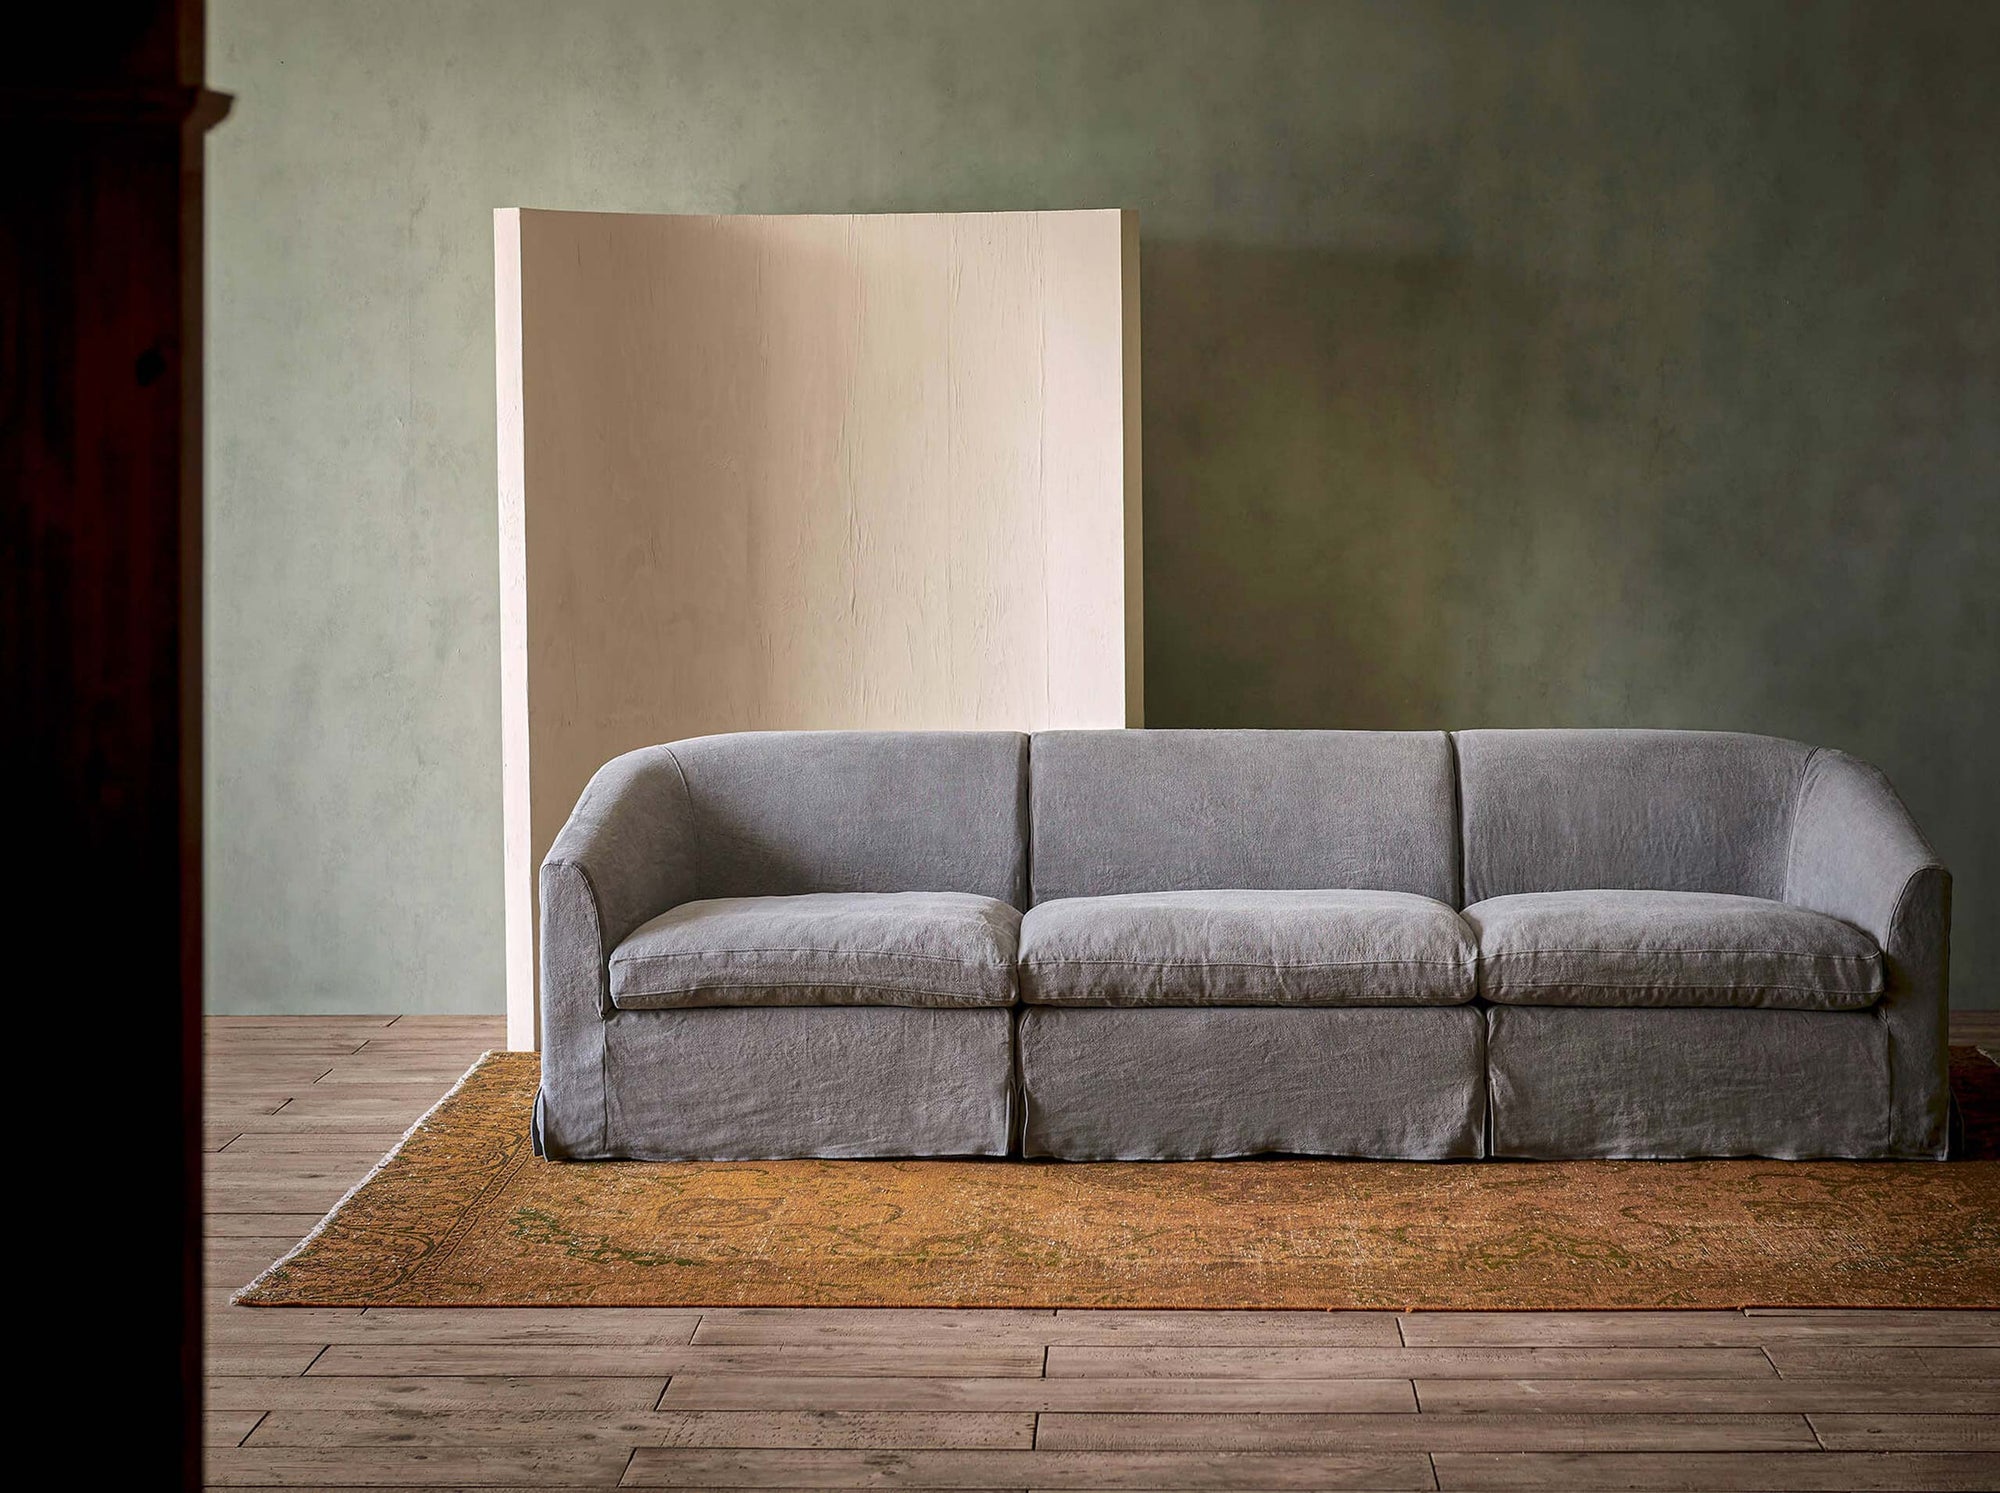 Ziki Sectional Sofa in Ink Cap, a medium cool grey Light Weight Linen, placed in a room with a console table